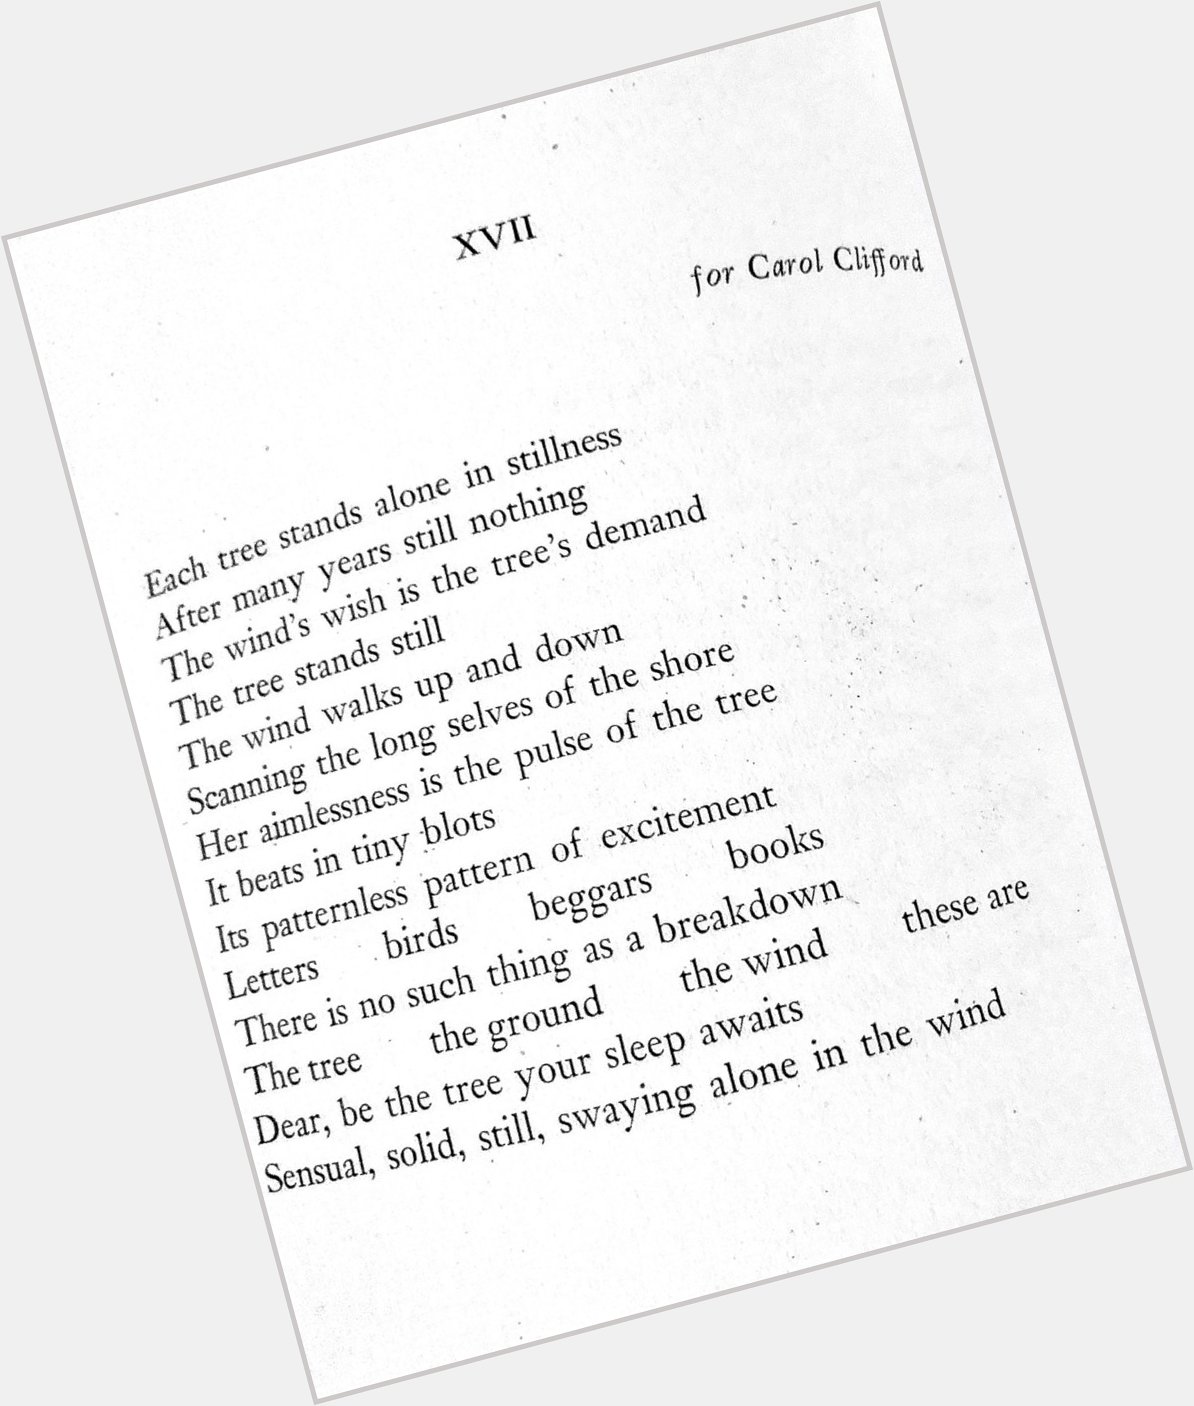 Happy birthday Ted Berrigan 
from The Sonnets
Grove, 1964 